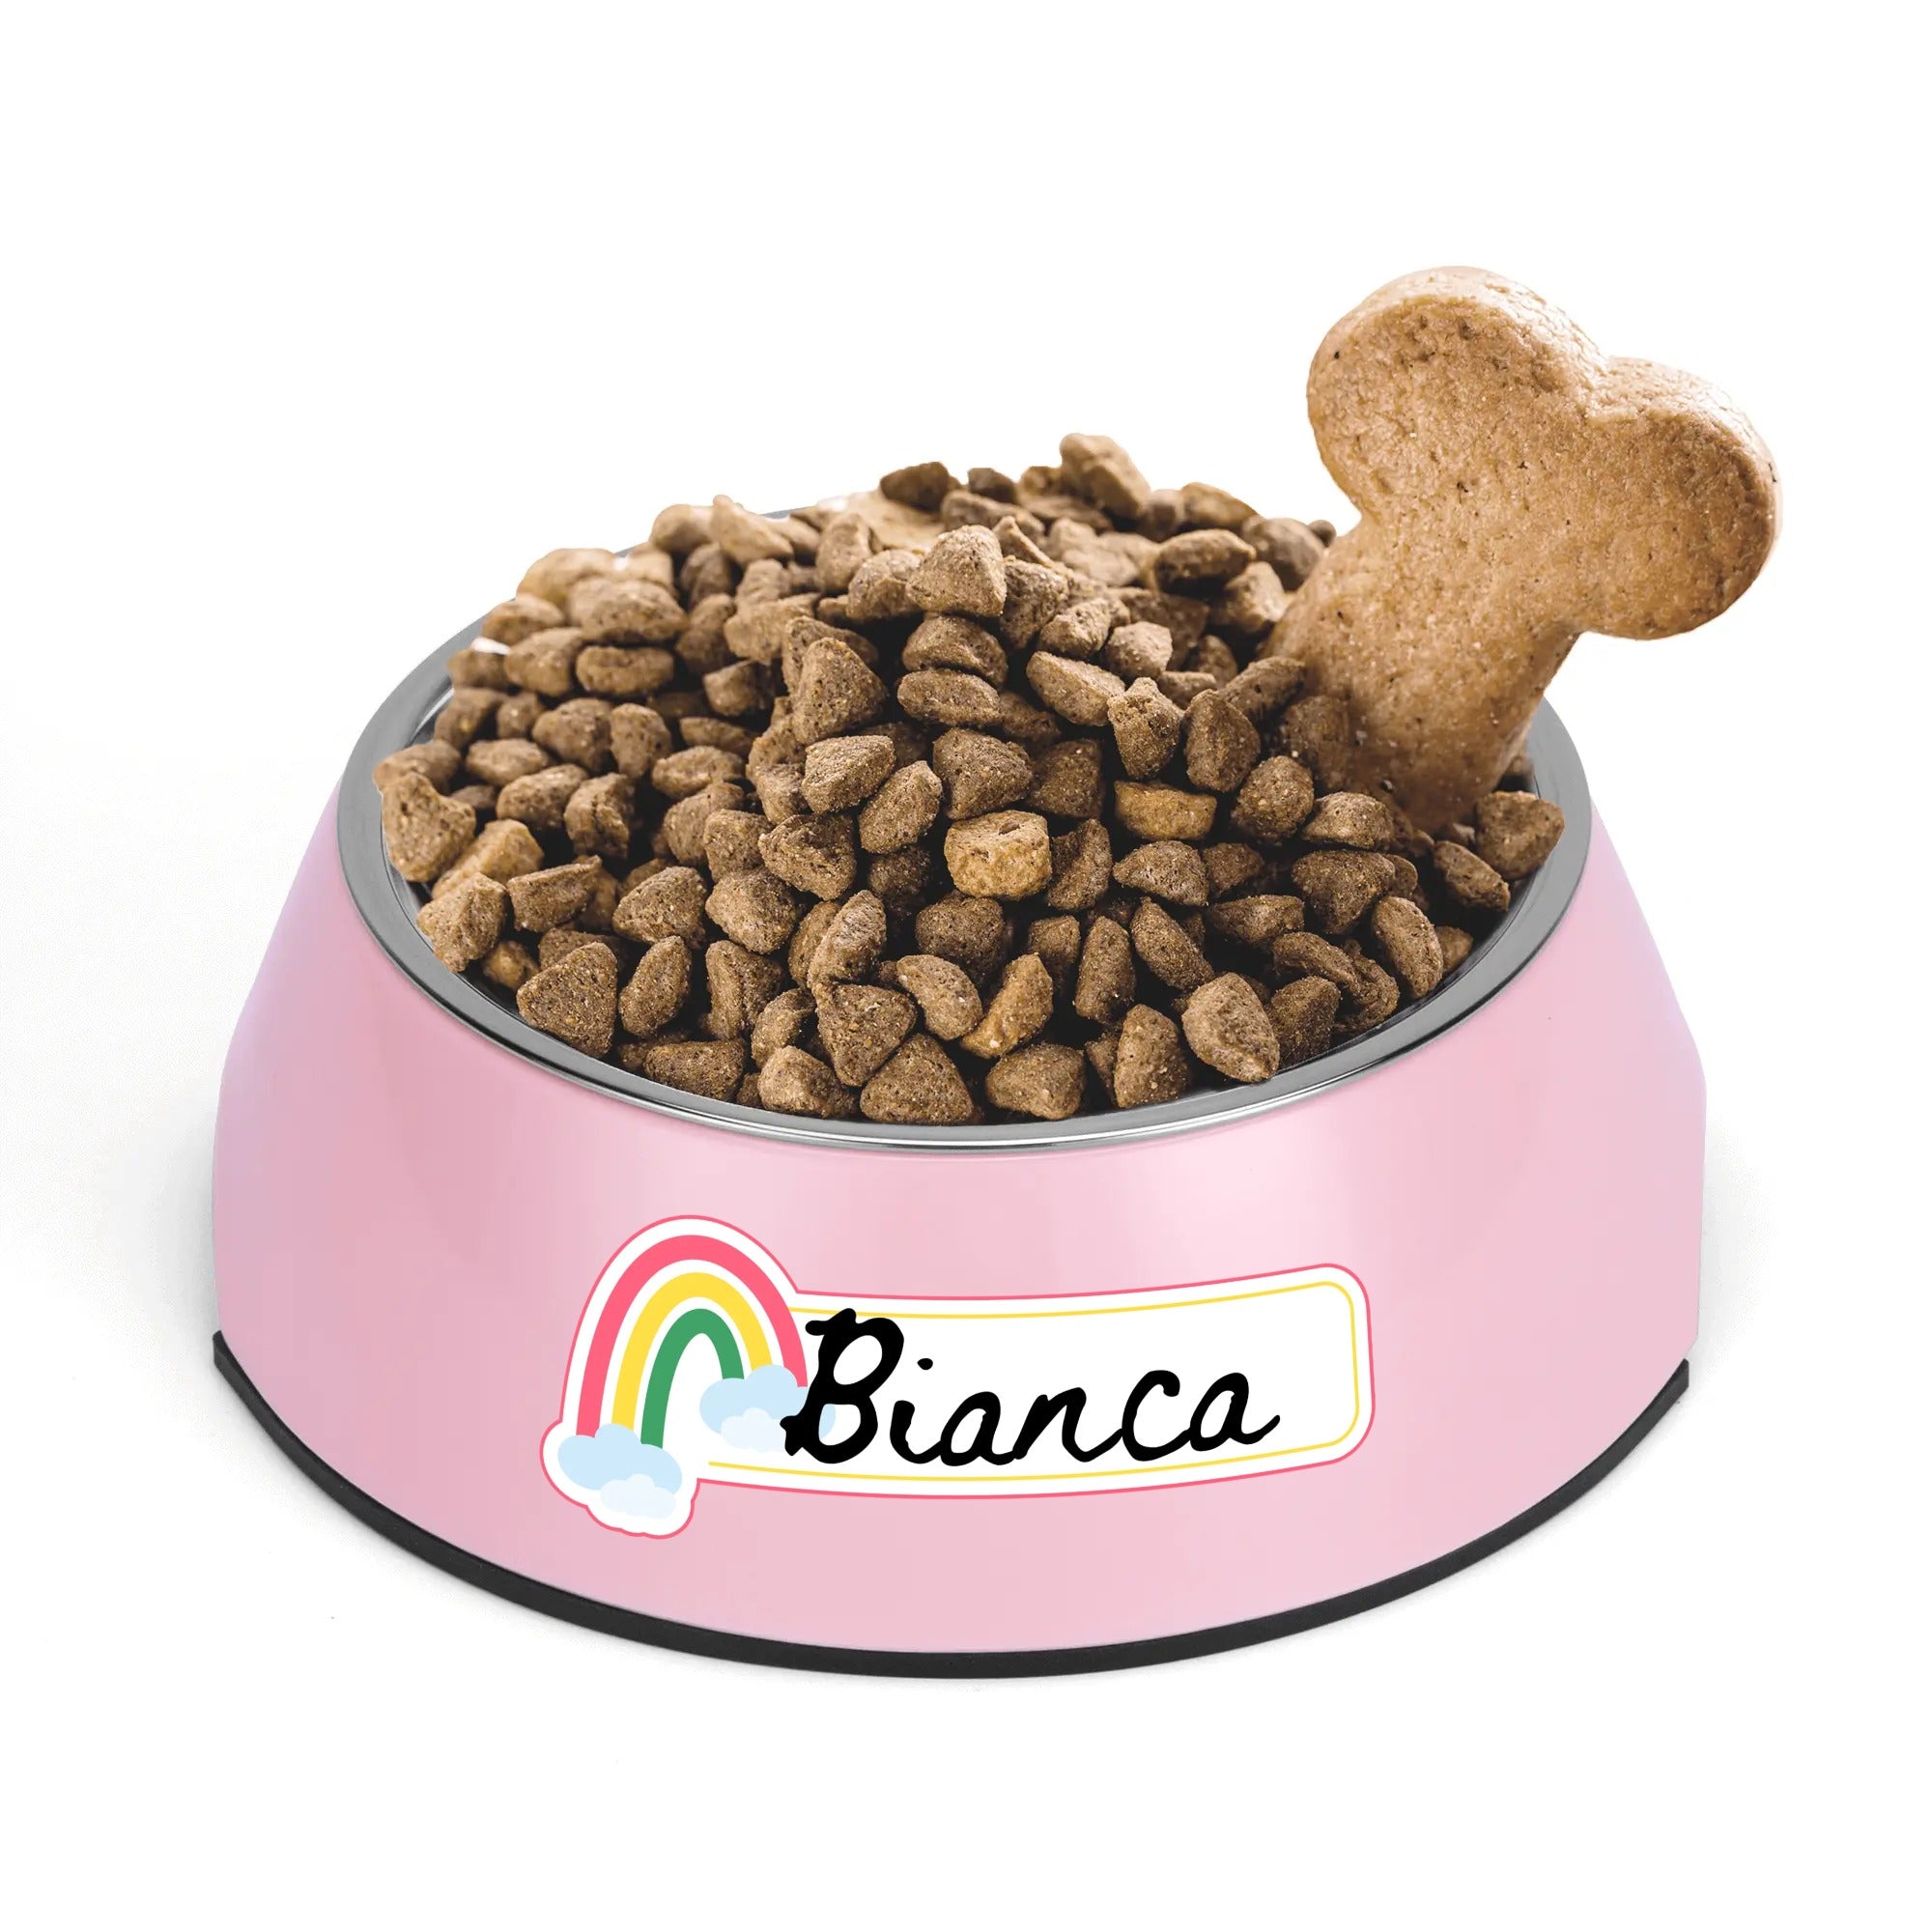 Stainless Steel Pet Bowl with Custom Name Plate